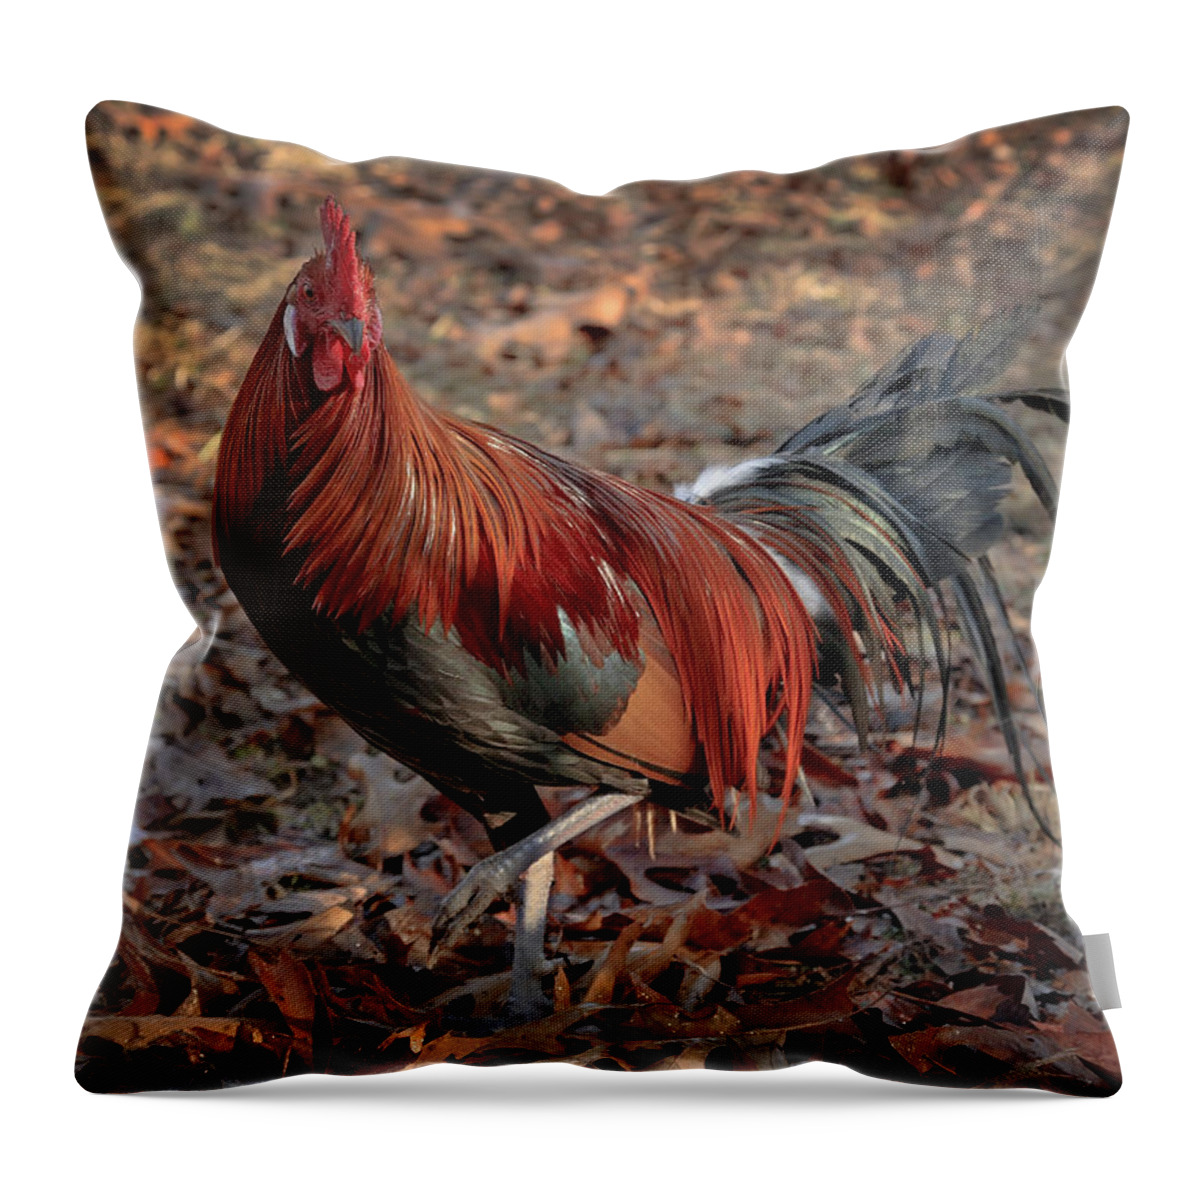 Chicken Throw Pillow featuring the photograph Black Breasted Red Phoenix Rooster by Michael Dougherty